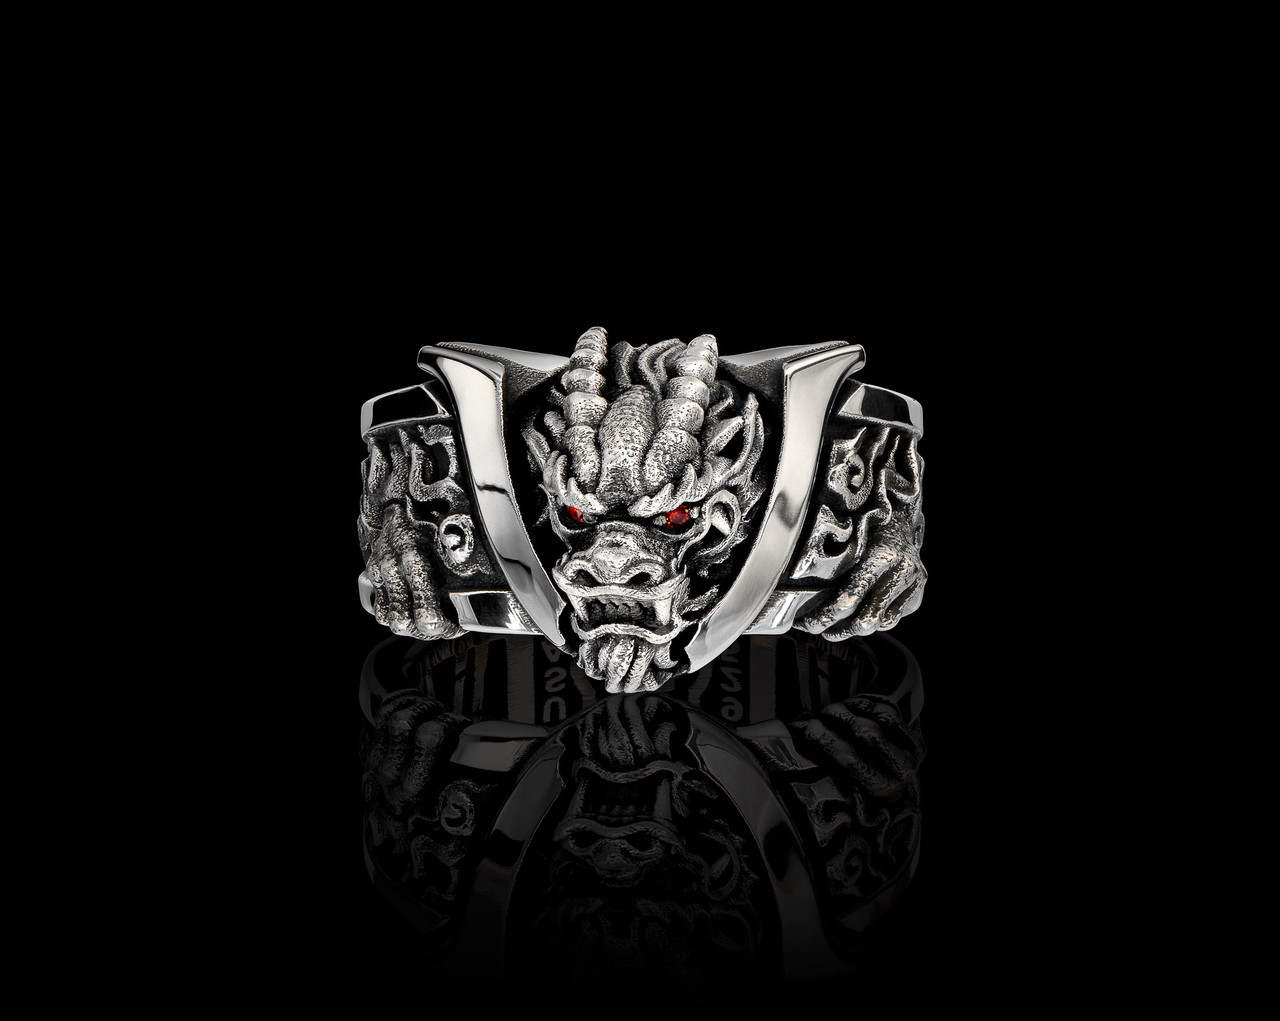 Bushido Band Samurai Dragon Ring in 925 Sterling Silver by NightRider Jewelry - Front